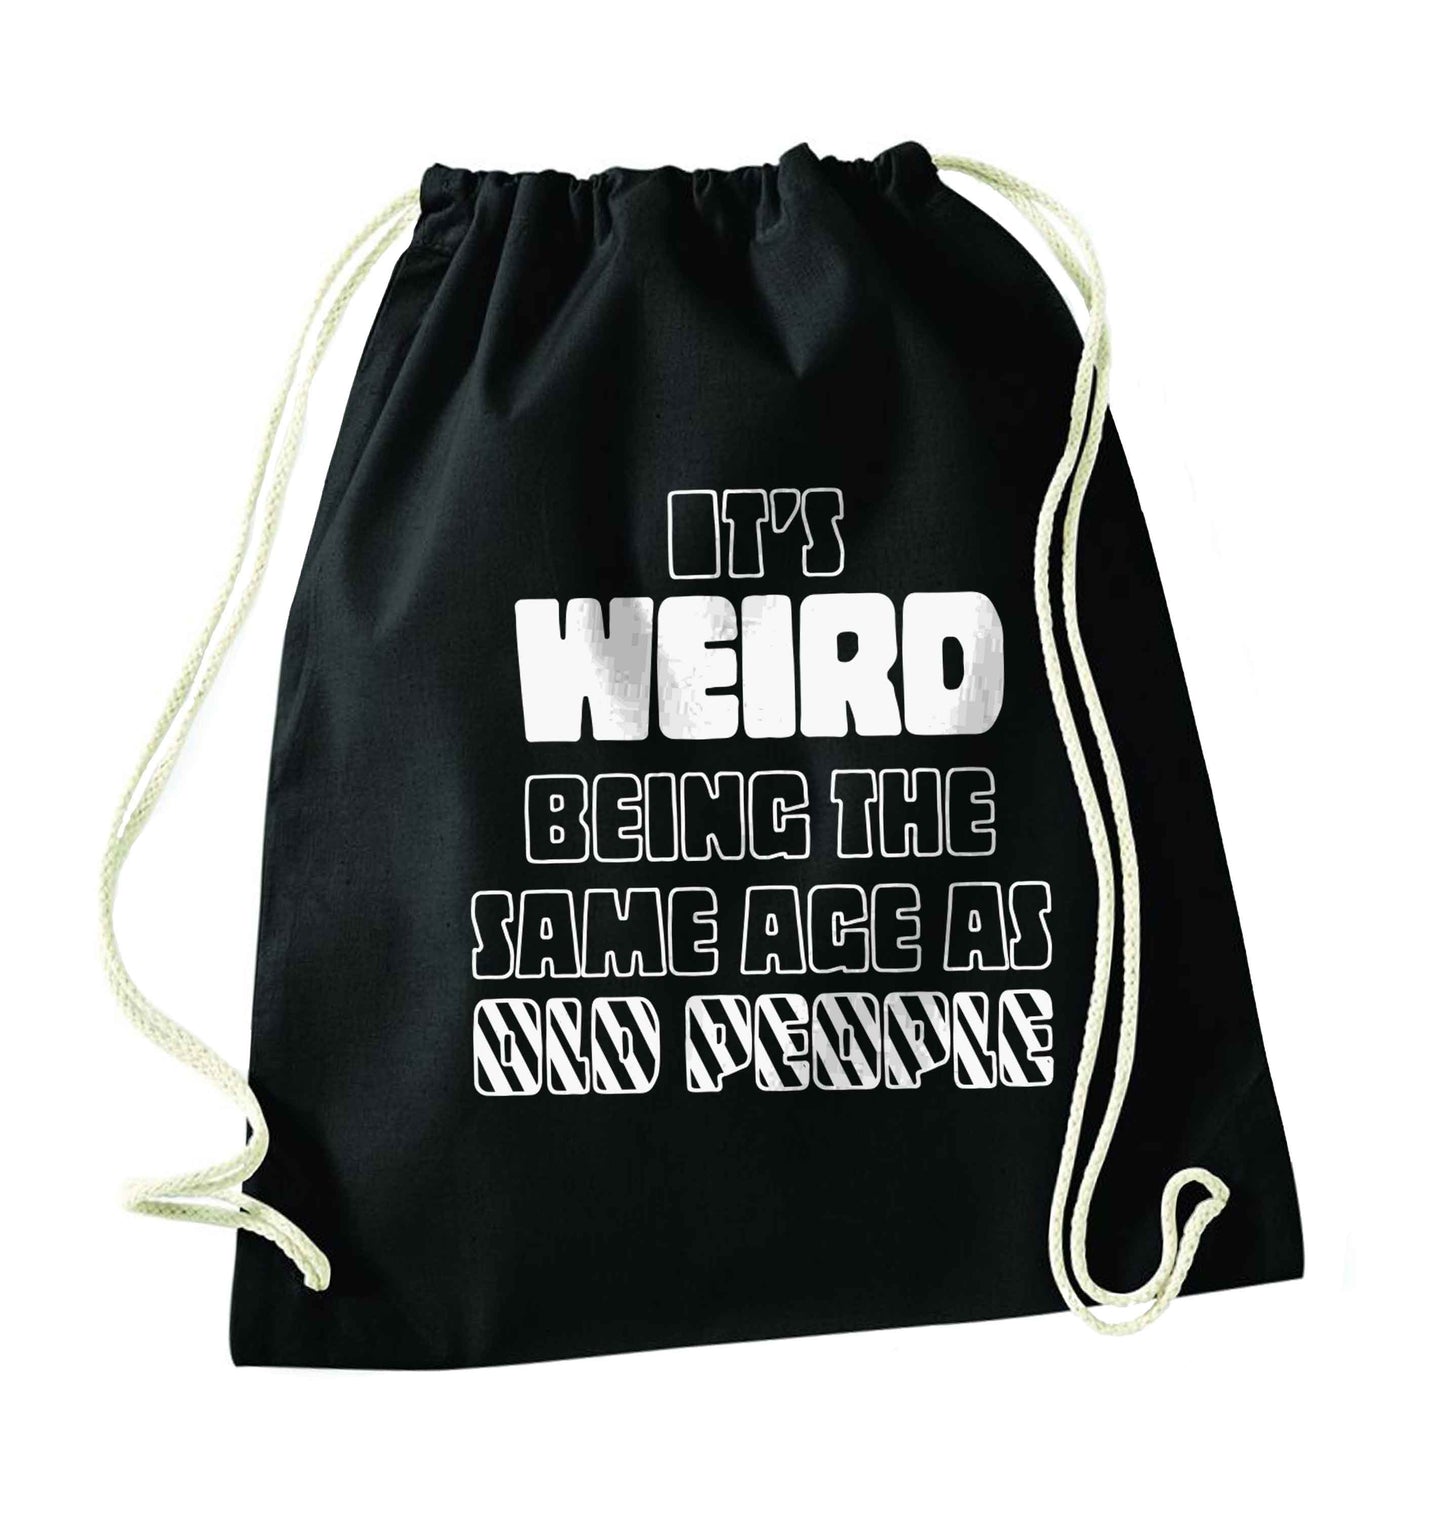 It's weird being the same age as old people black drawstring bag